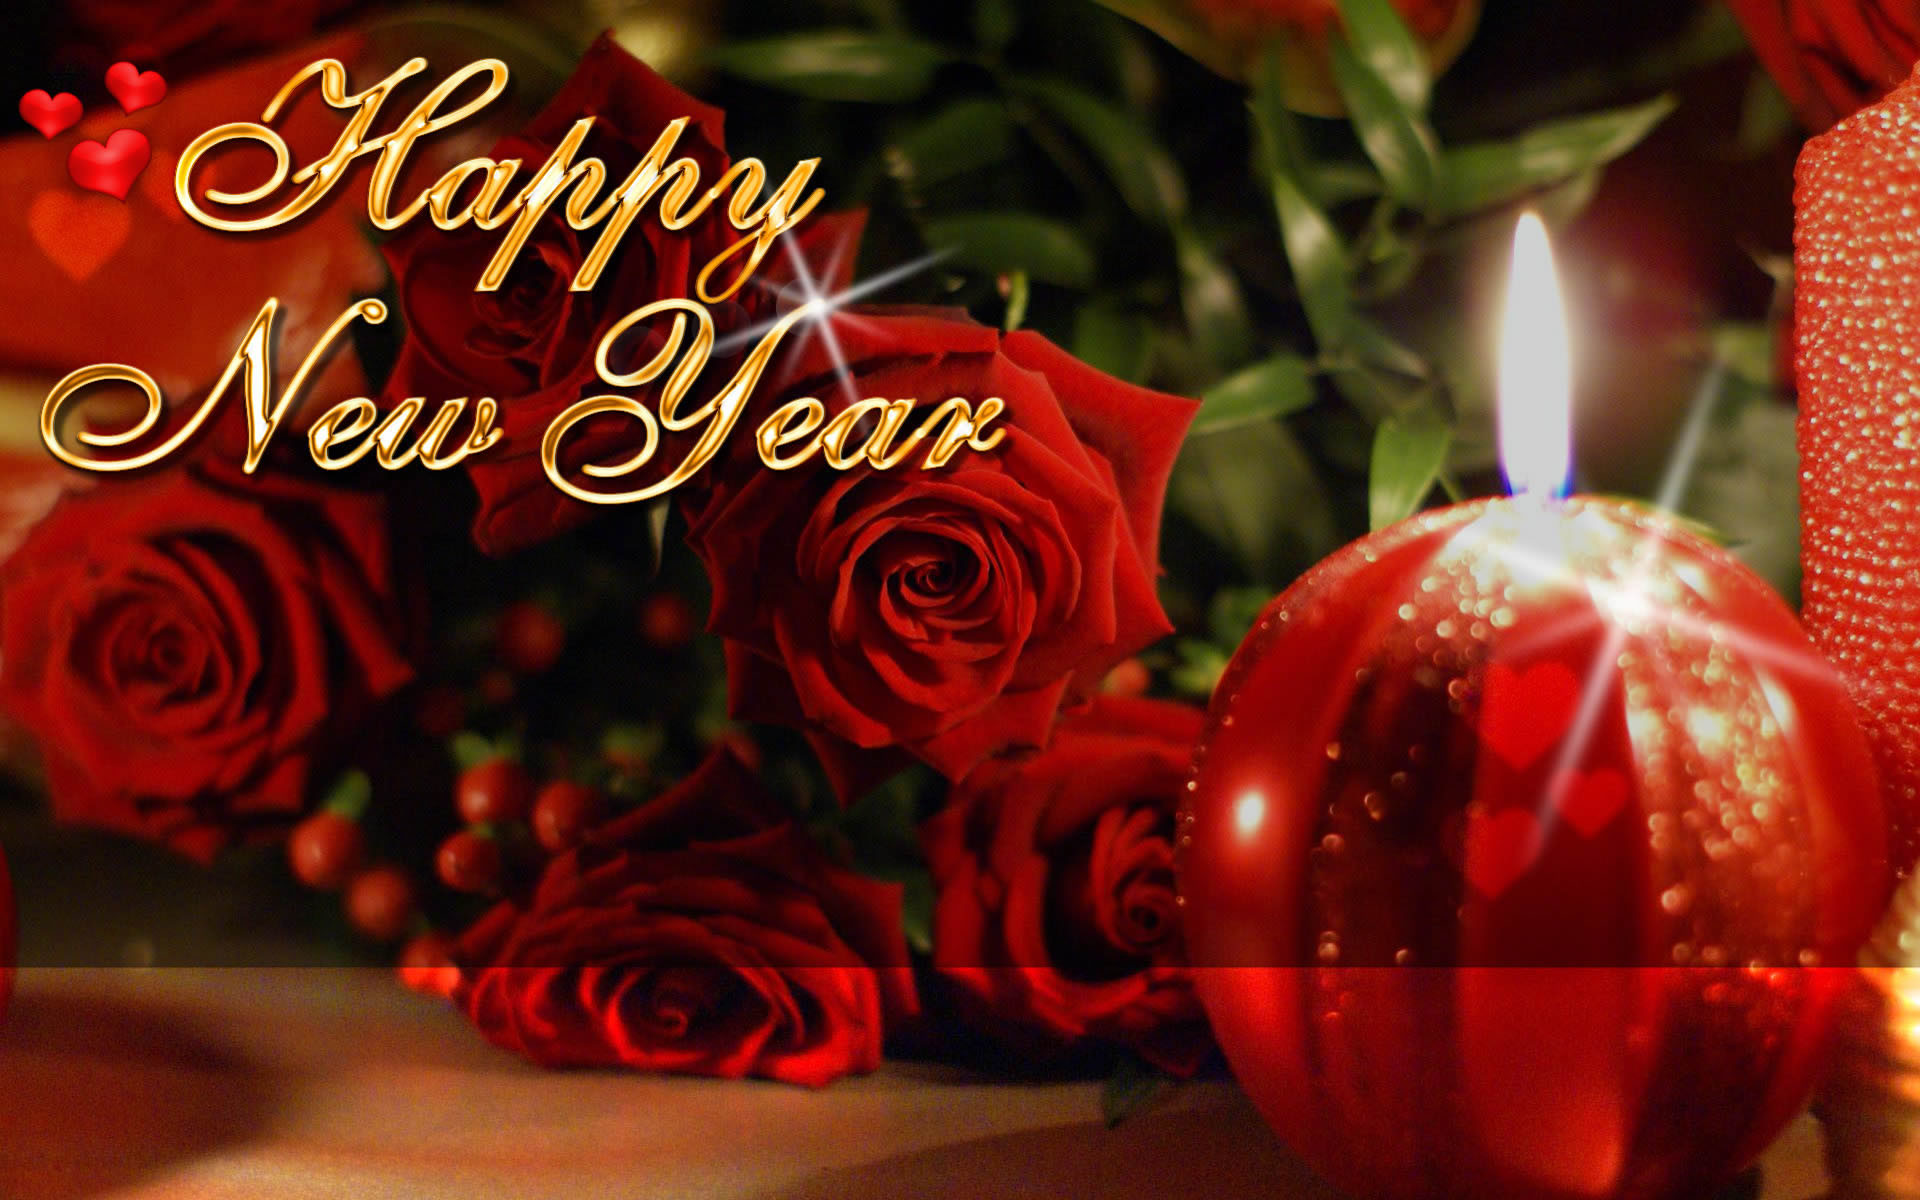 beautiful happy year greetings wishes download